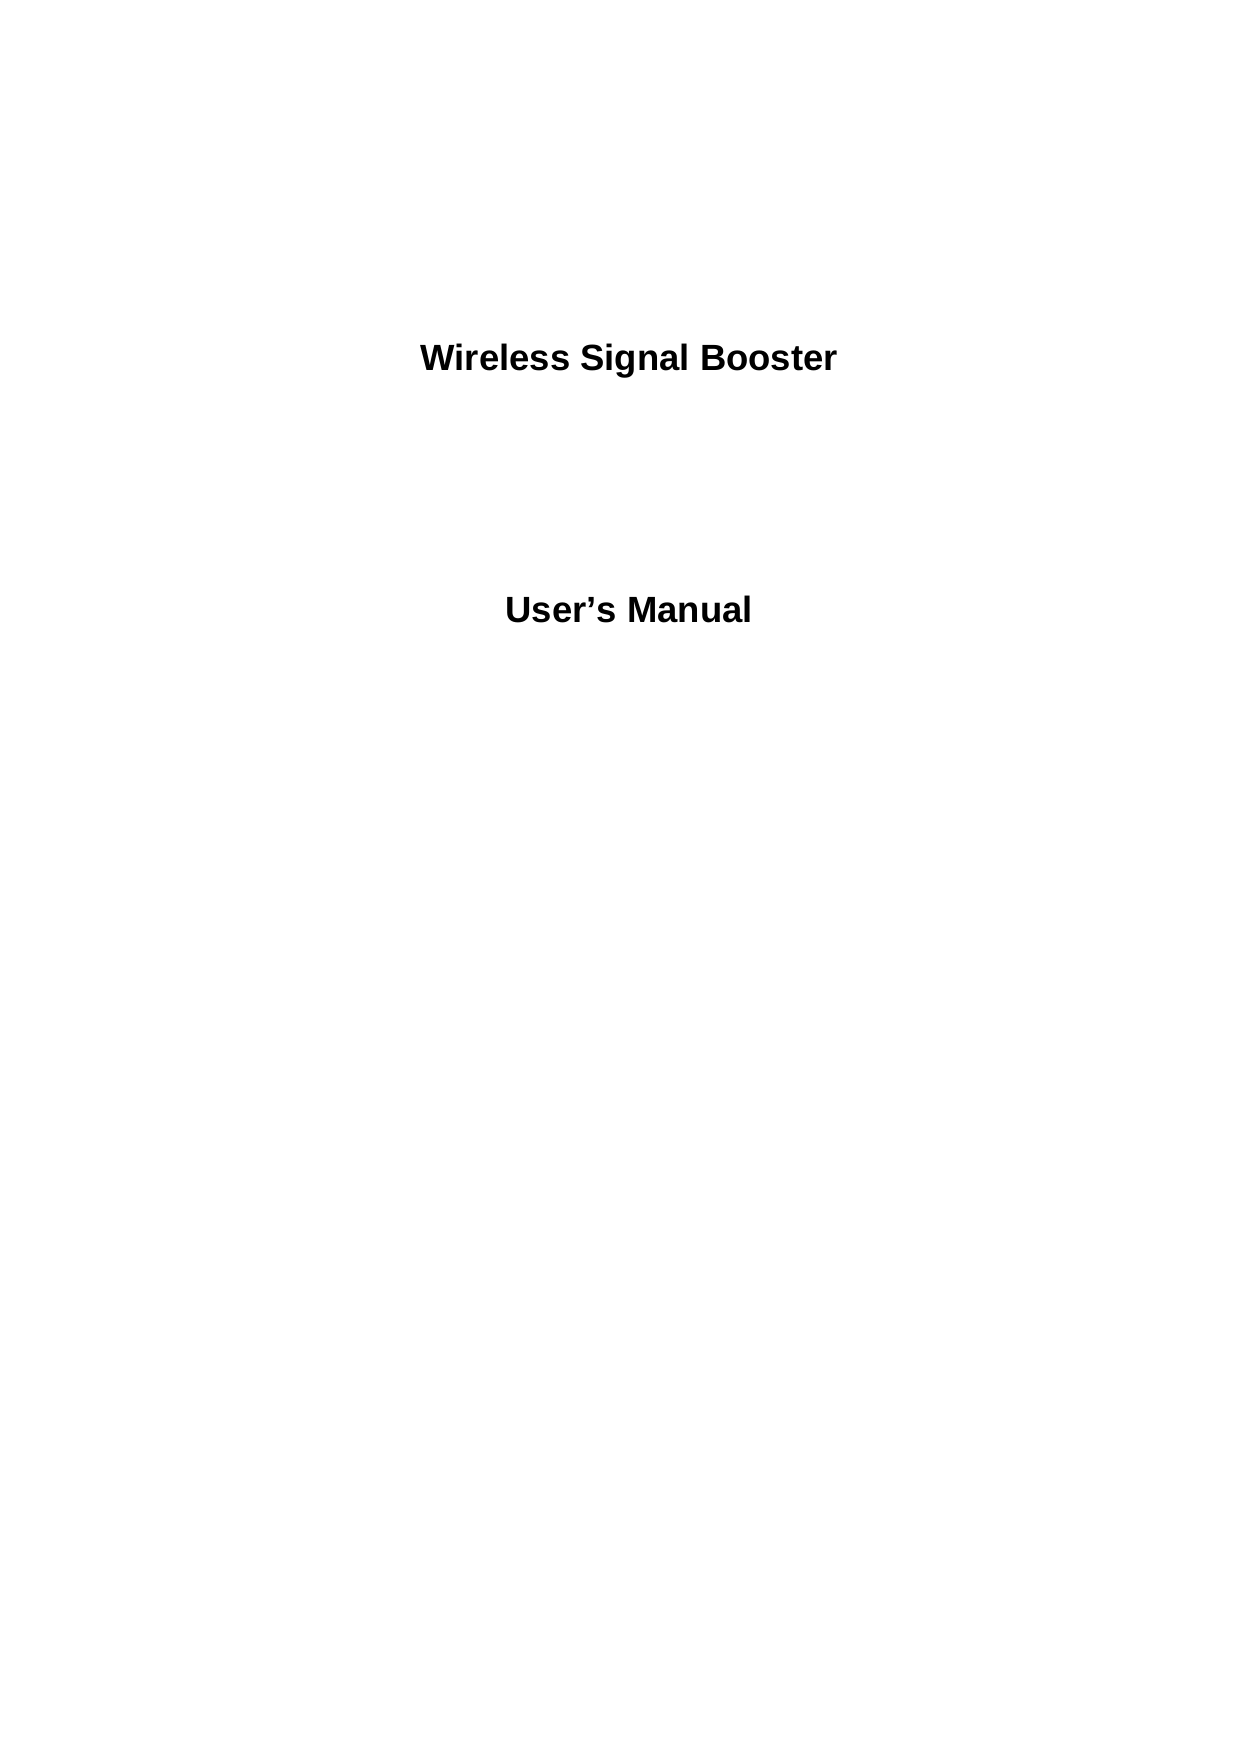      Wireless Signal Booster      User’s Manual                                      